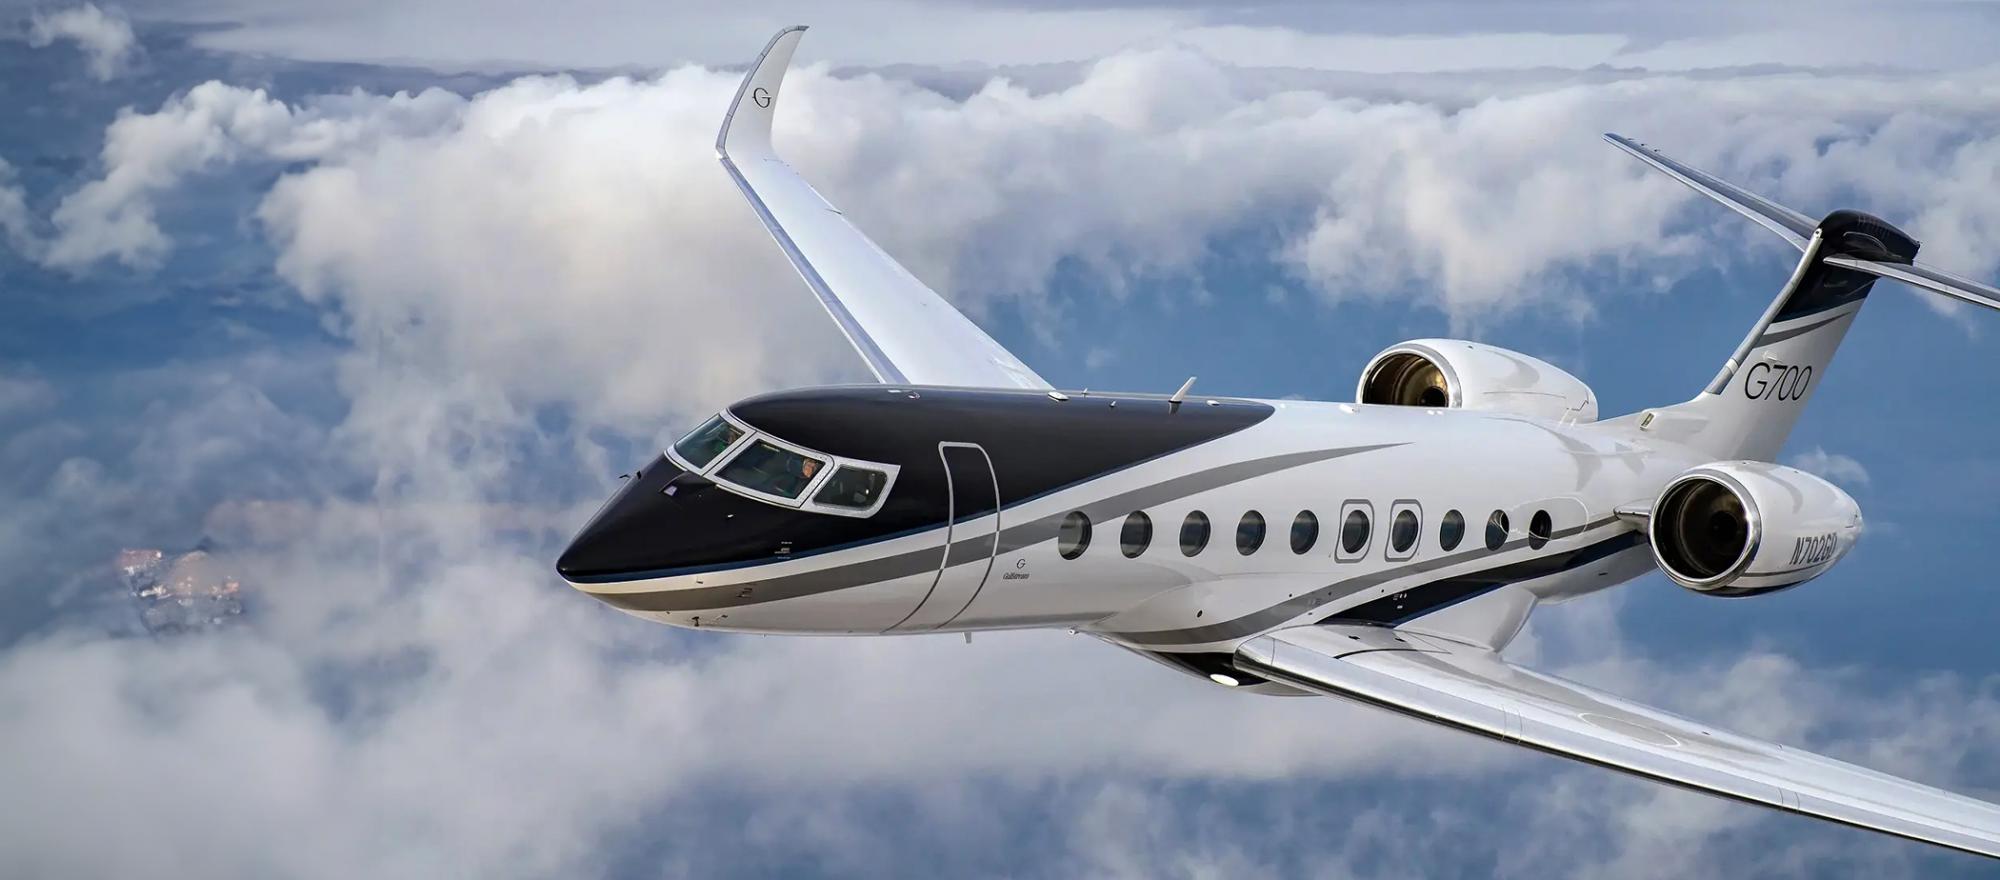 The $81 million G700 is now Gulfstream’s flagship.